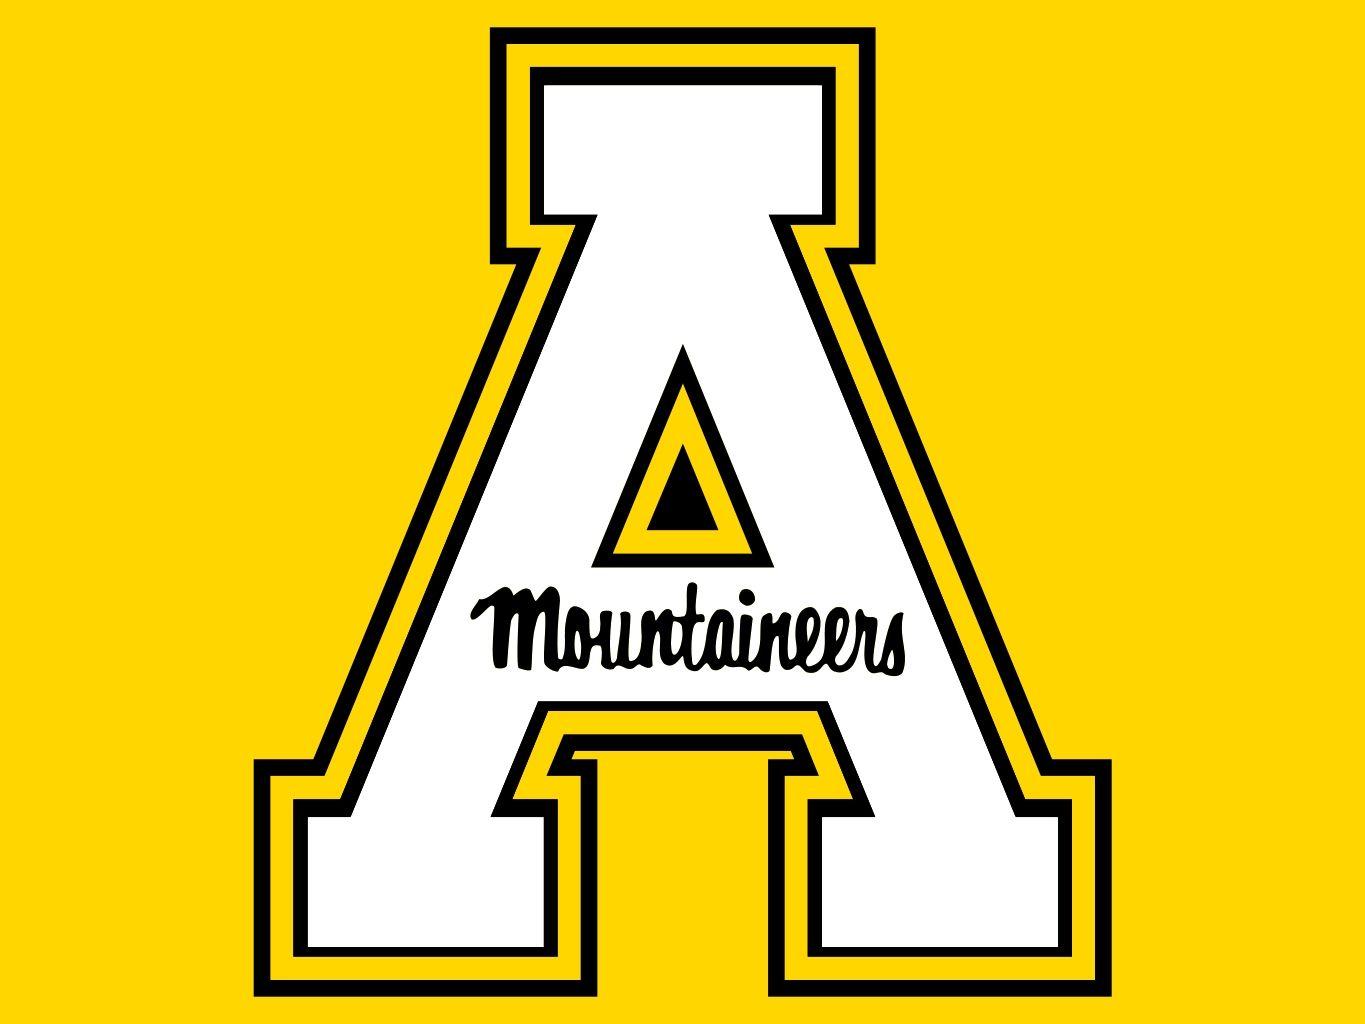 Appalachian State! #Love Go Mountaineers! -Accepted and going to